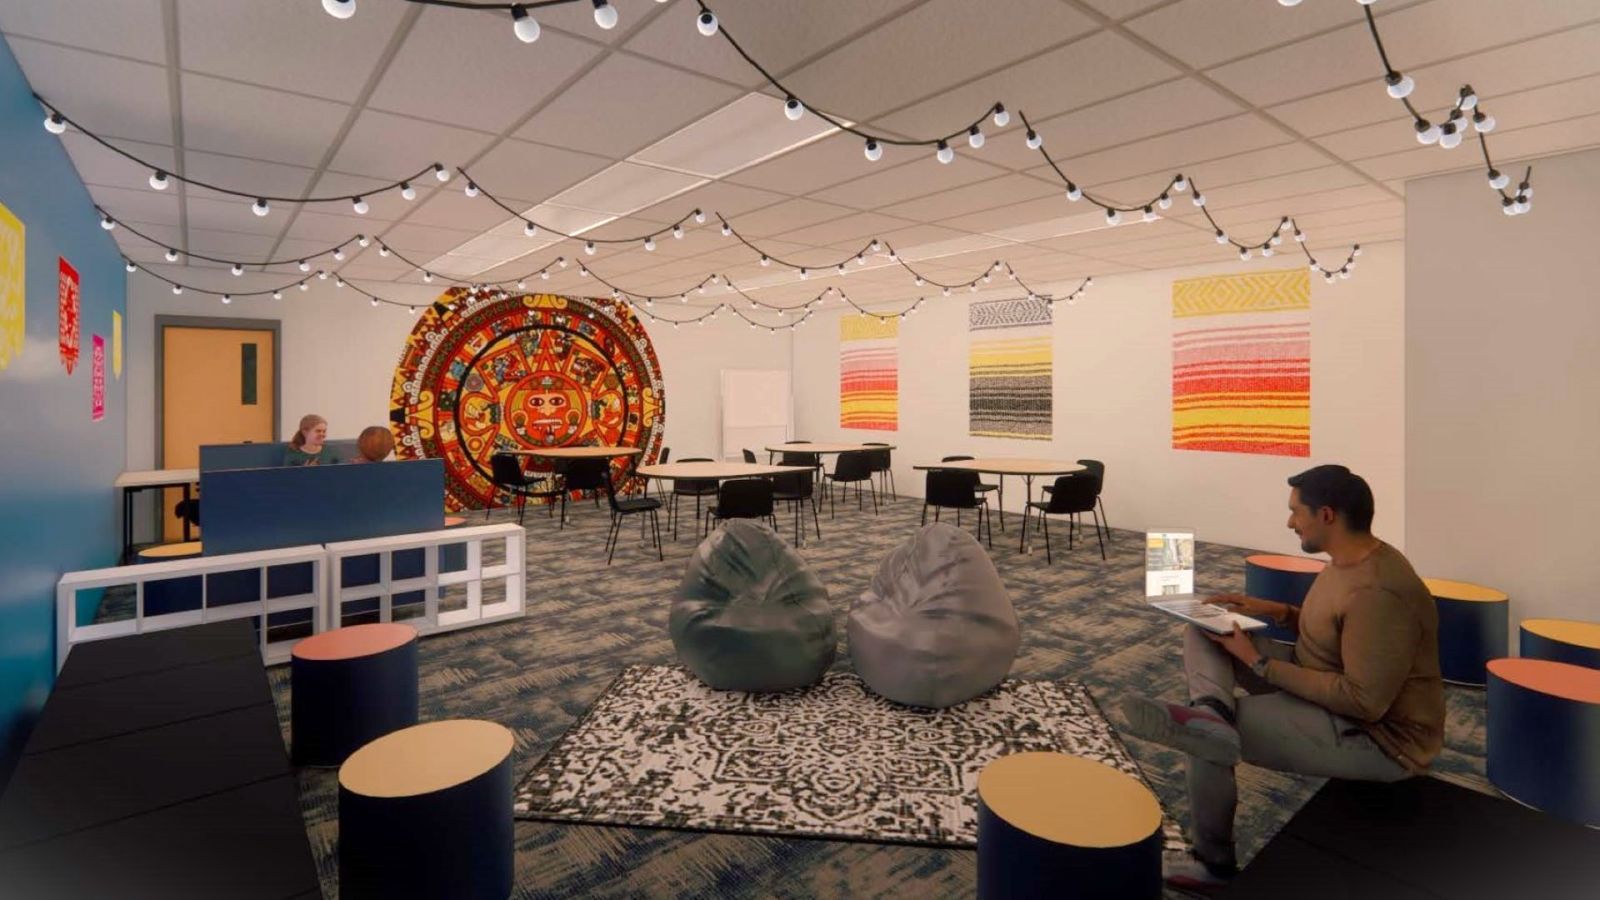 A room mockup done by Indianapolis students for the La Casa de Amistad cultural center in the city. (Photo provided)